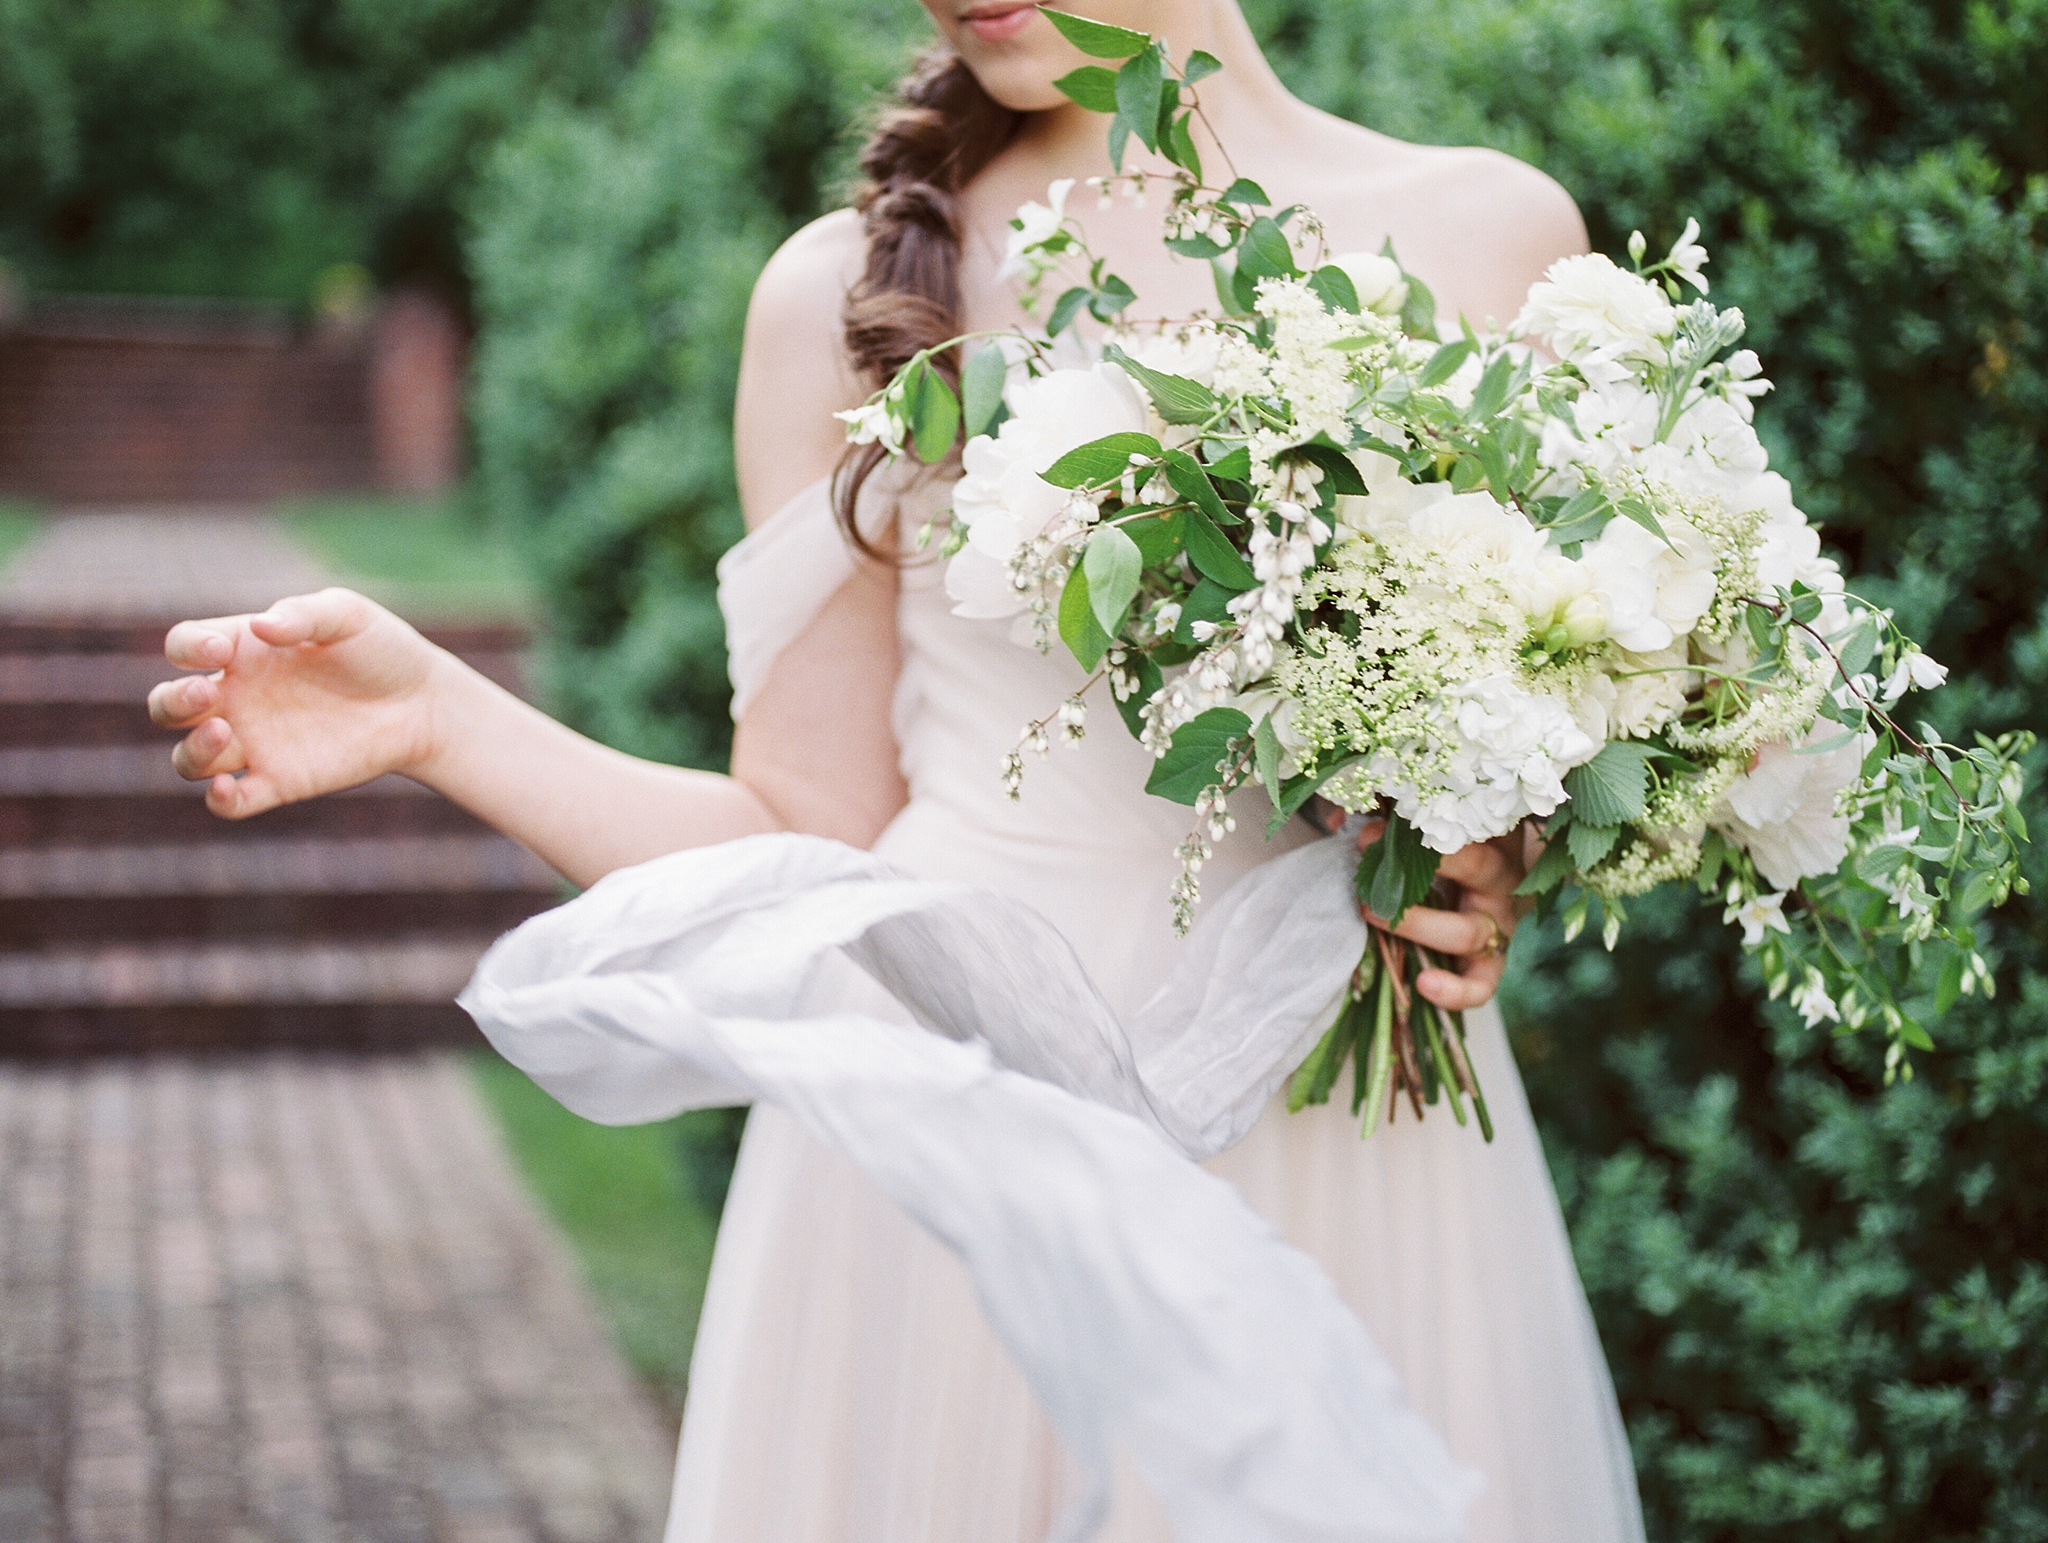 Not all bridal bouquets are created equal! This Washington, DC wedding photographer shares 5 tips on how to ensure yours is perfect for the big day.